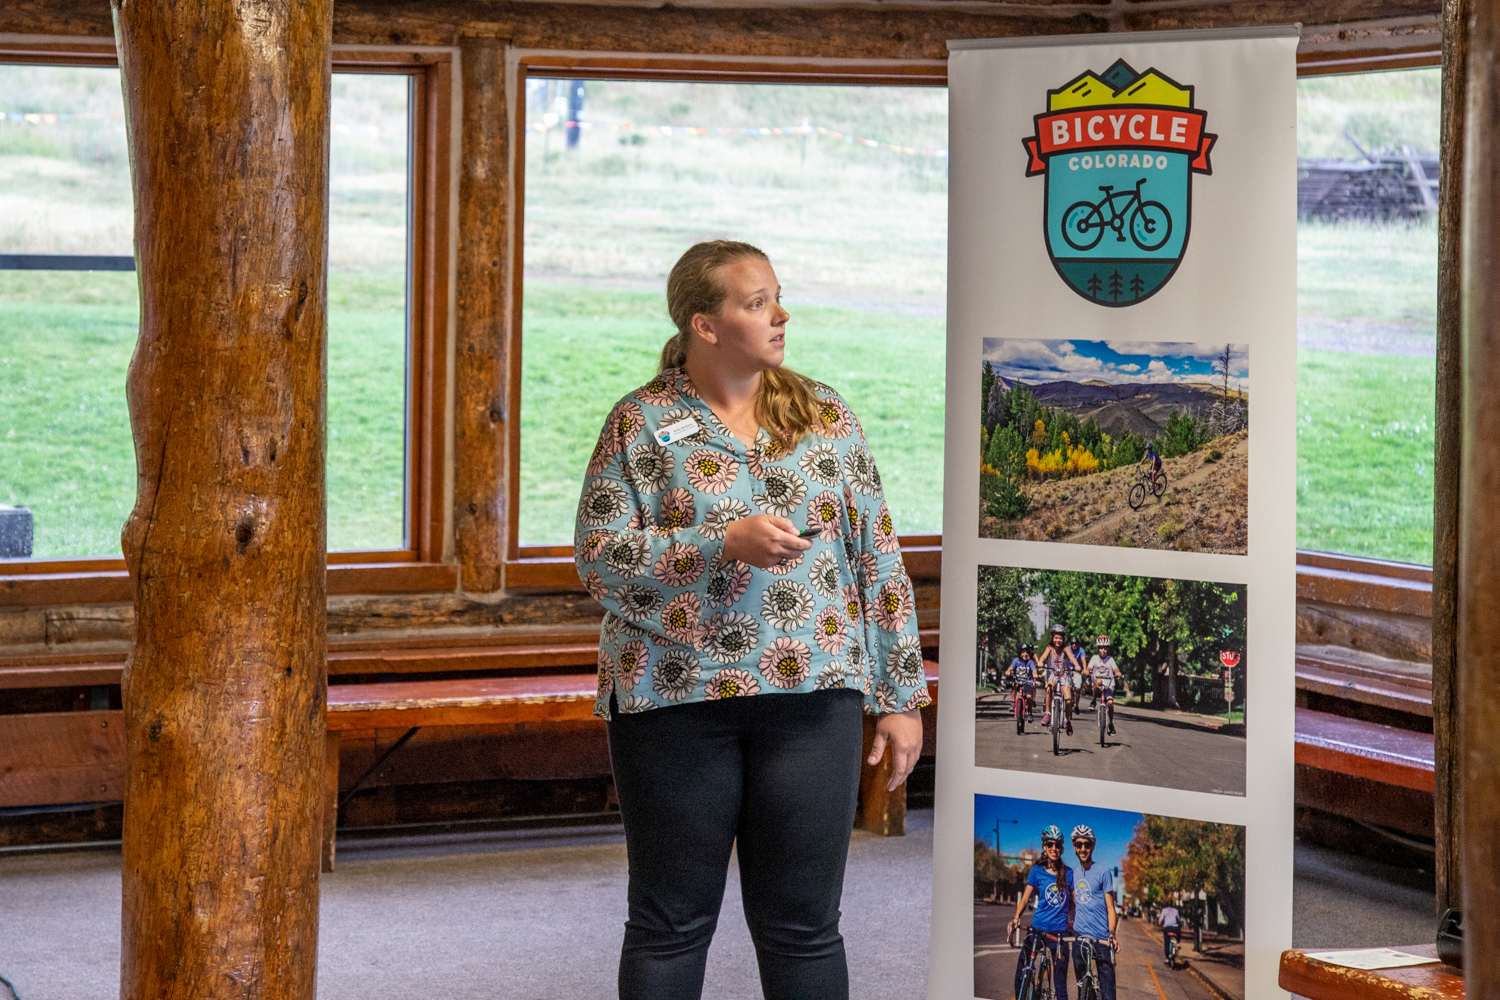 A white woman looks to the right to a presentation offscreen, standing next to a vertical banner with photos of people bicycling and the Bicycle Colorado logo.